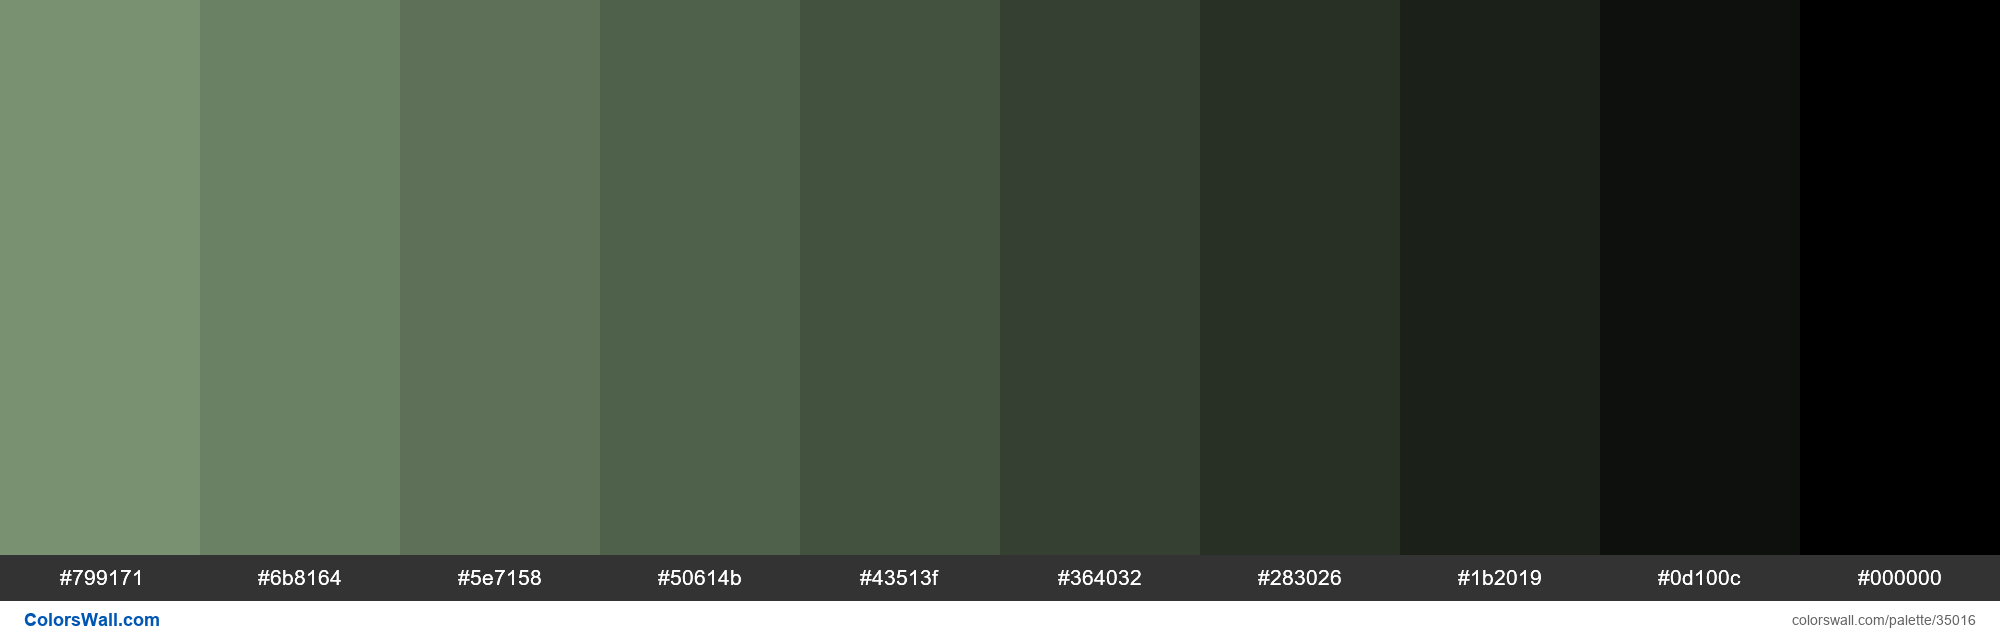 colorswall on X: Shades XKCD Color jade green #2baf6a hex #279e5f,  #228c55, #1e7a4a, #1a6940, #165835, #11462a, #0d3520, #092315, #04110b,  #000000 #colors #palette   /  X